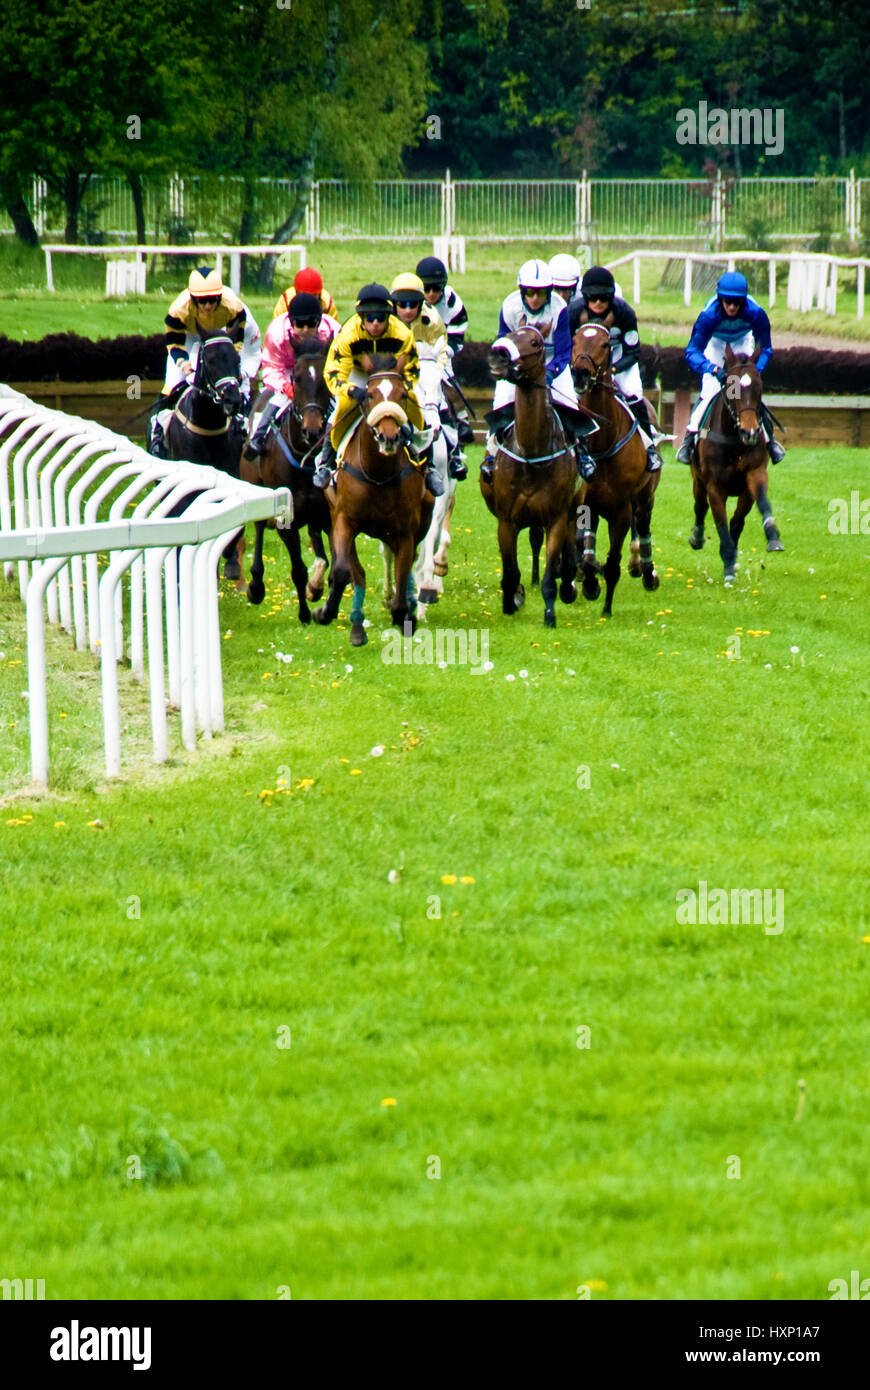 final sprint of a steeplechase horse race Stock Photo